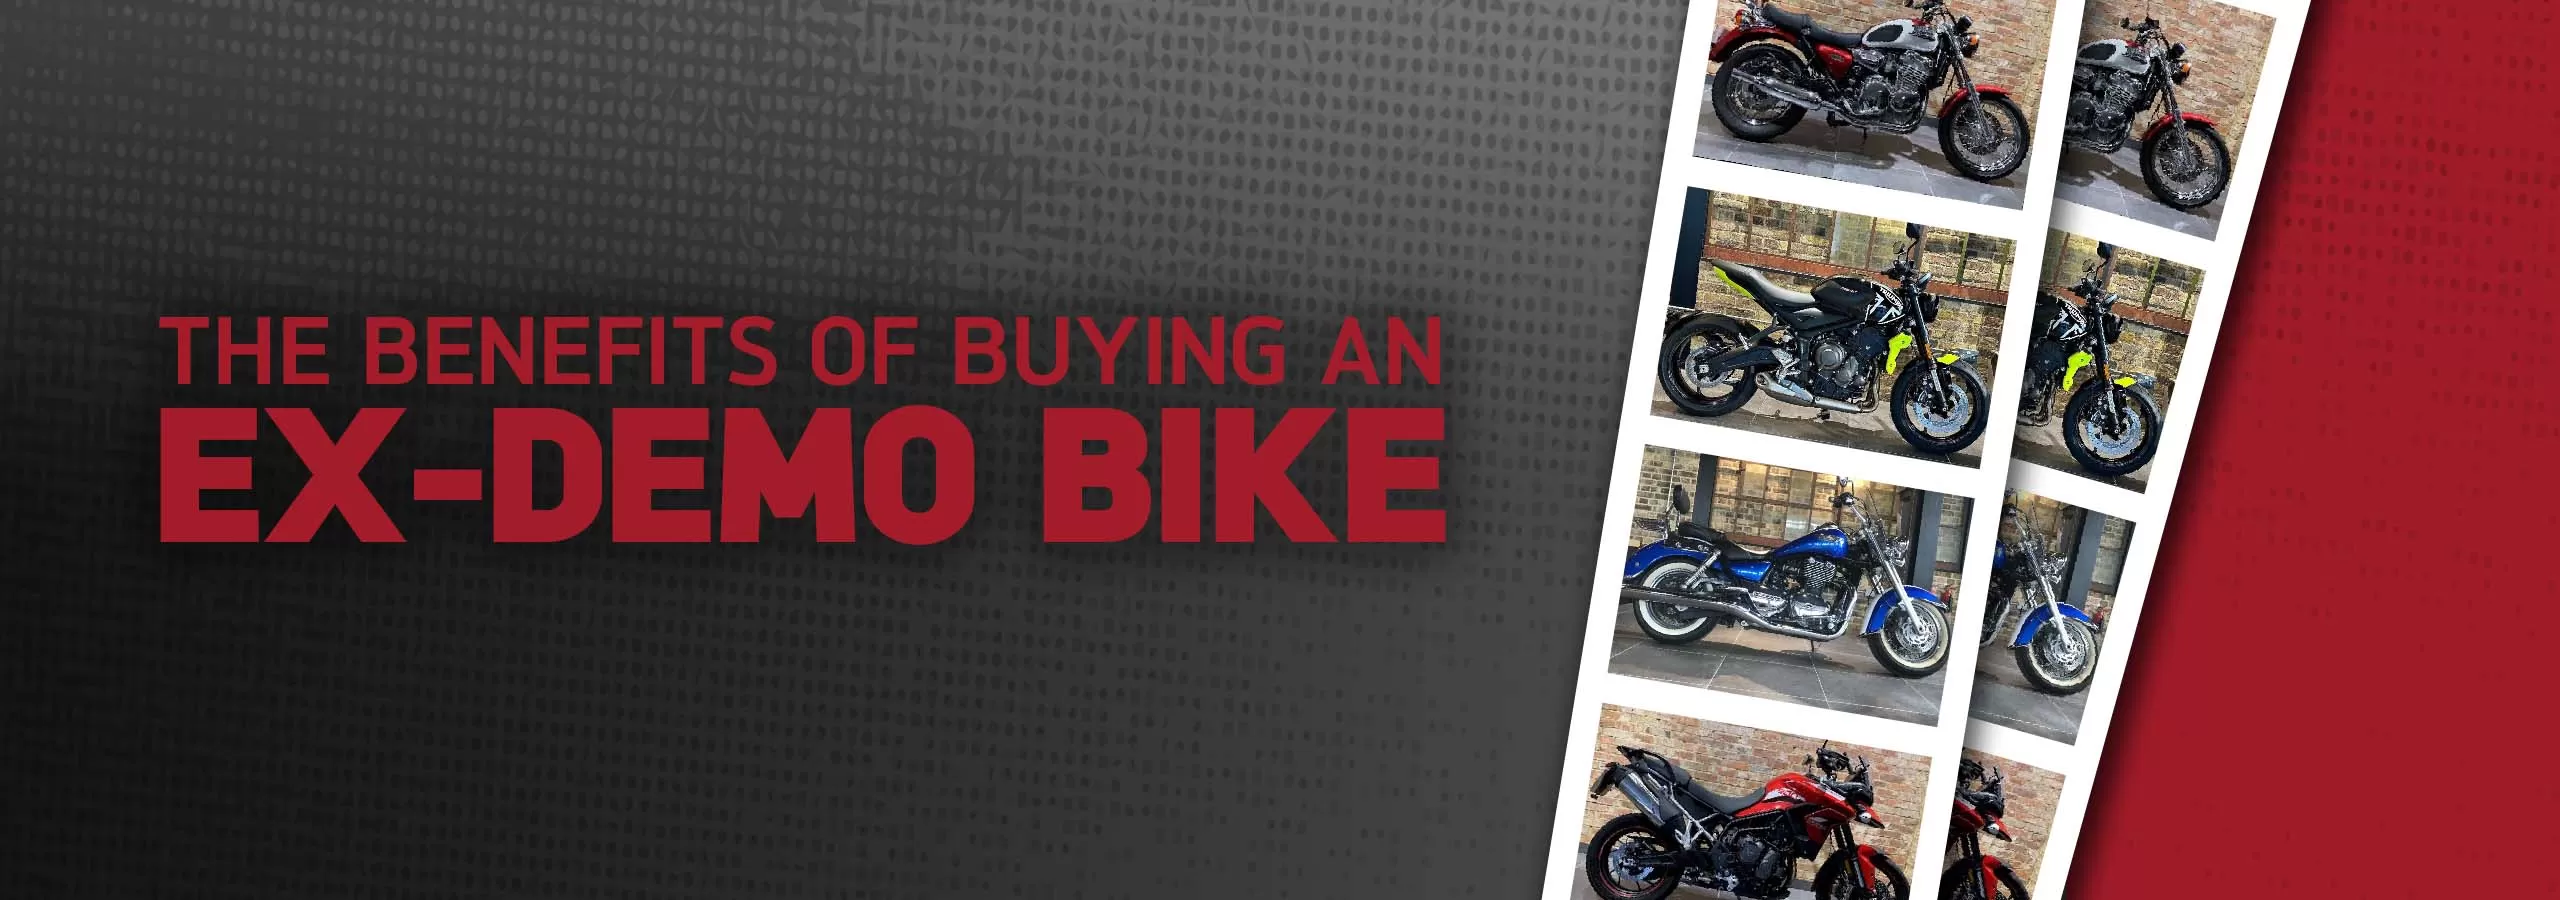 The Benefits of Buying an Ex-Demo Bike from Laguna Motorcycles